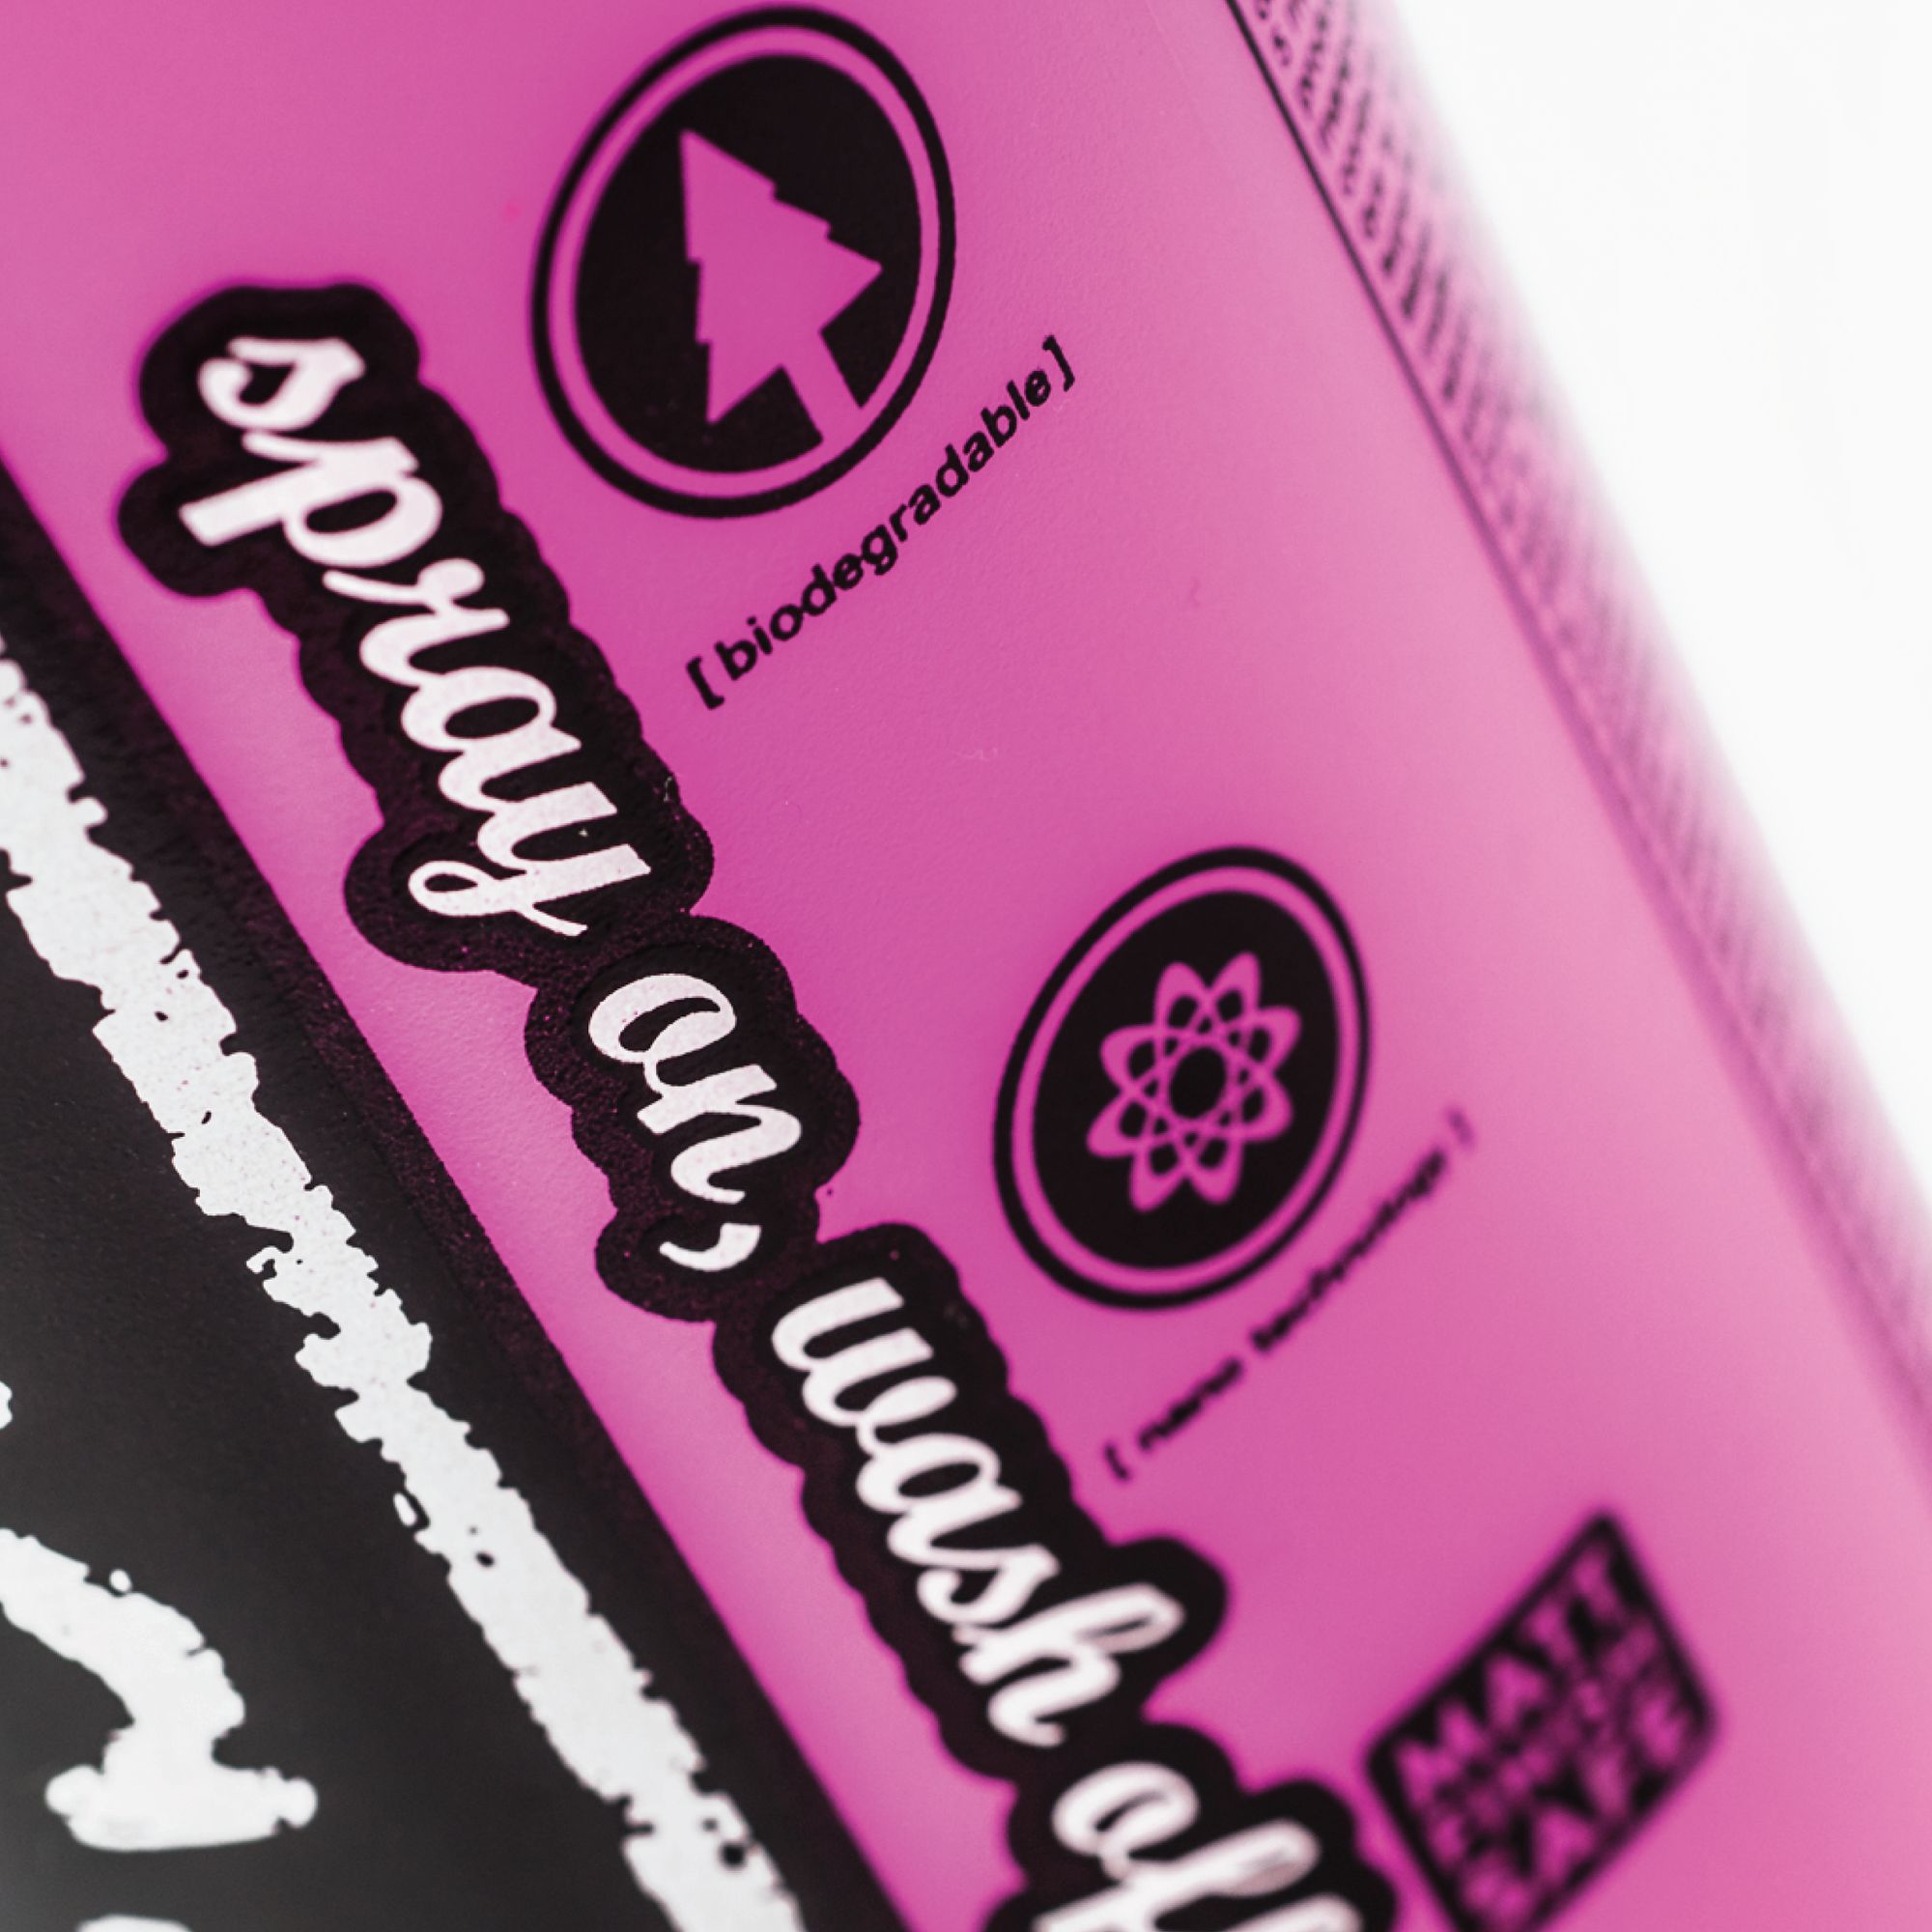 Muc-Off Nano Gel Concentrate for Bike Cleaner - bike-components